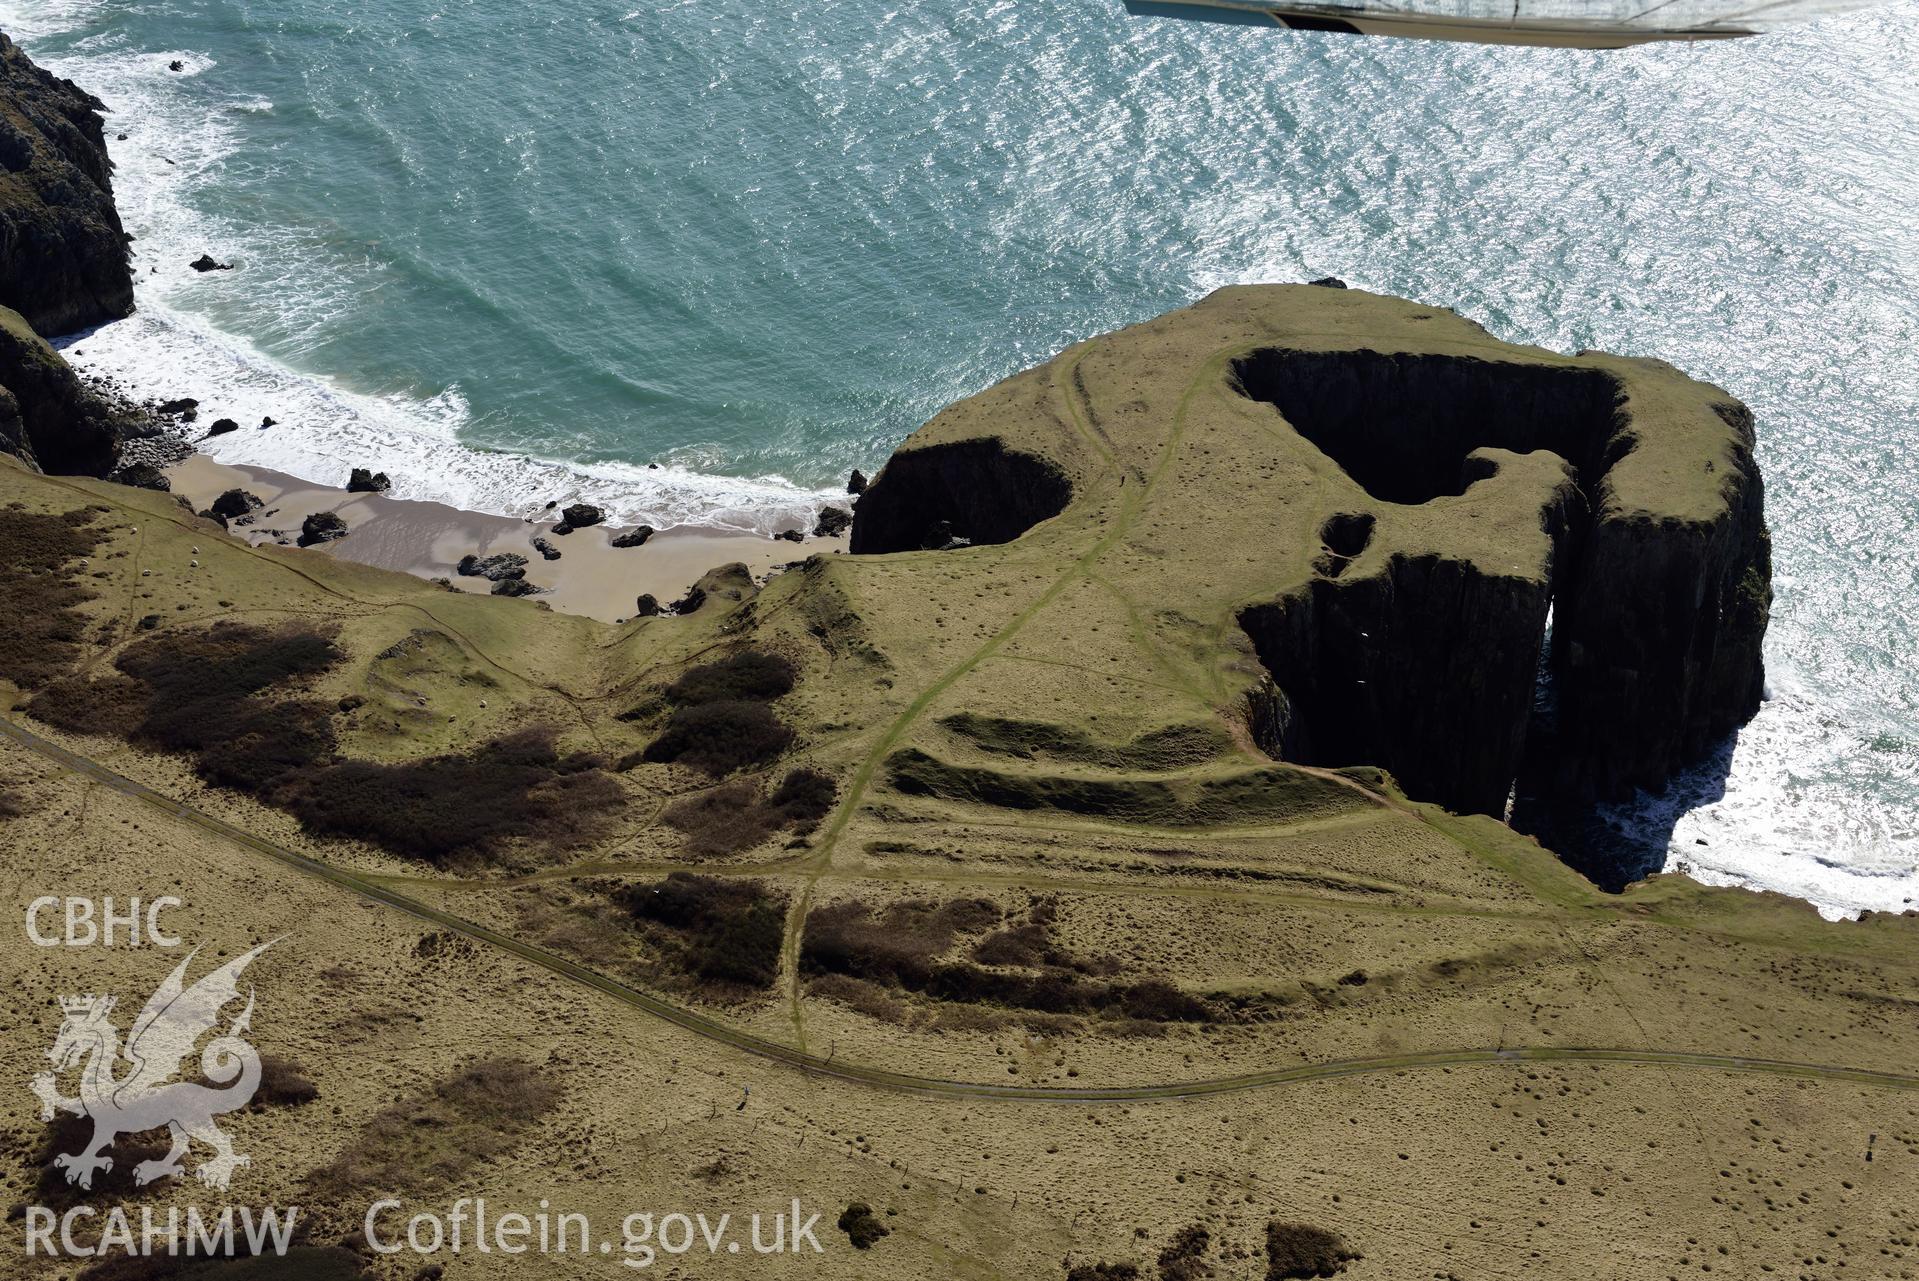 Flimston Bay promontory fort. Detailed baseline aerial reconnaissance survey for the CHERISH Project. ? Crown: CHERISH PROJECT 2018. Produced with EU funds through the Ireland Wales Co-operation Programme 2014-2020. All material made freely available through the Open Government Licence.